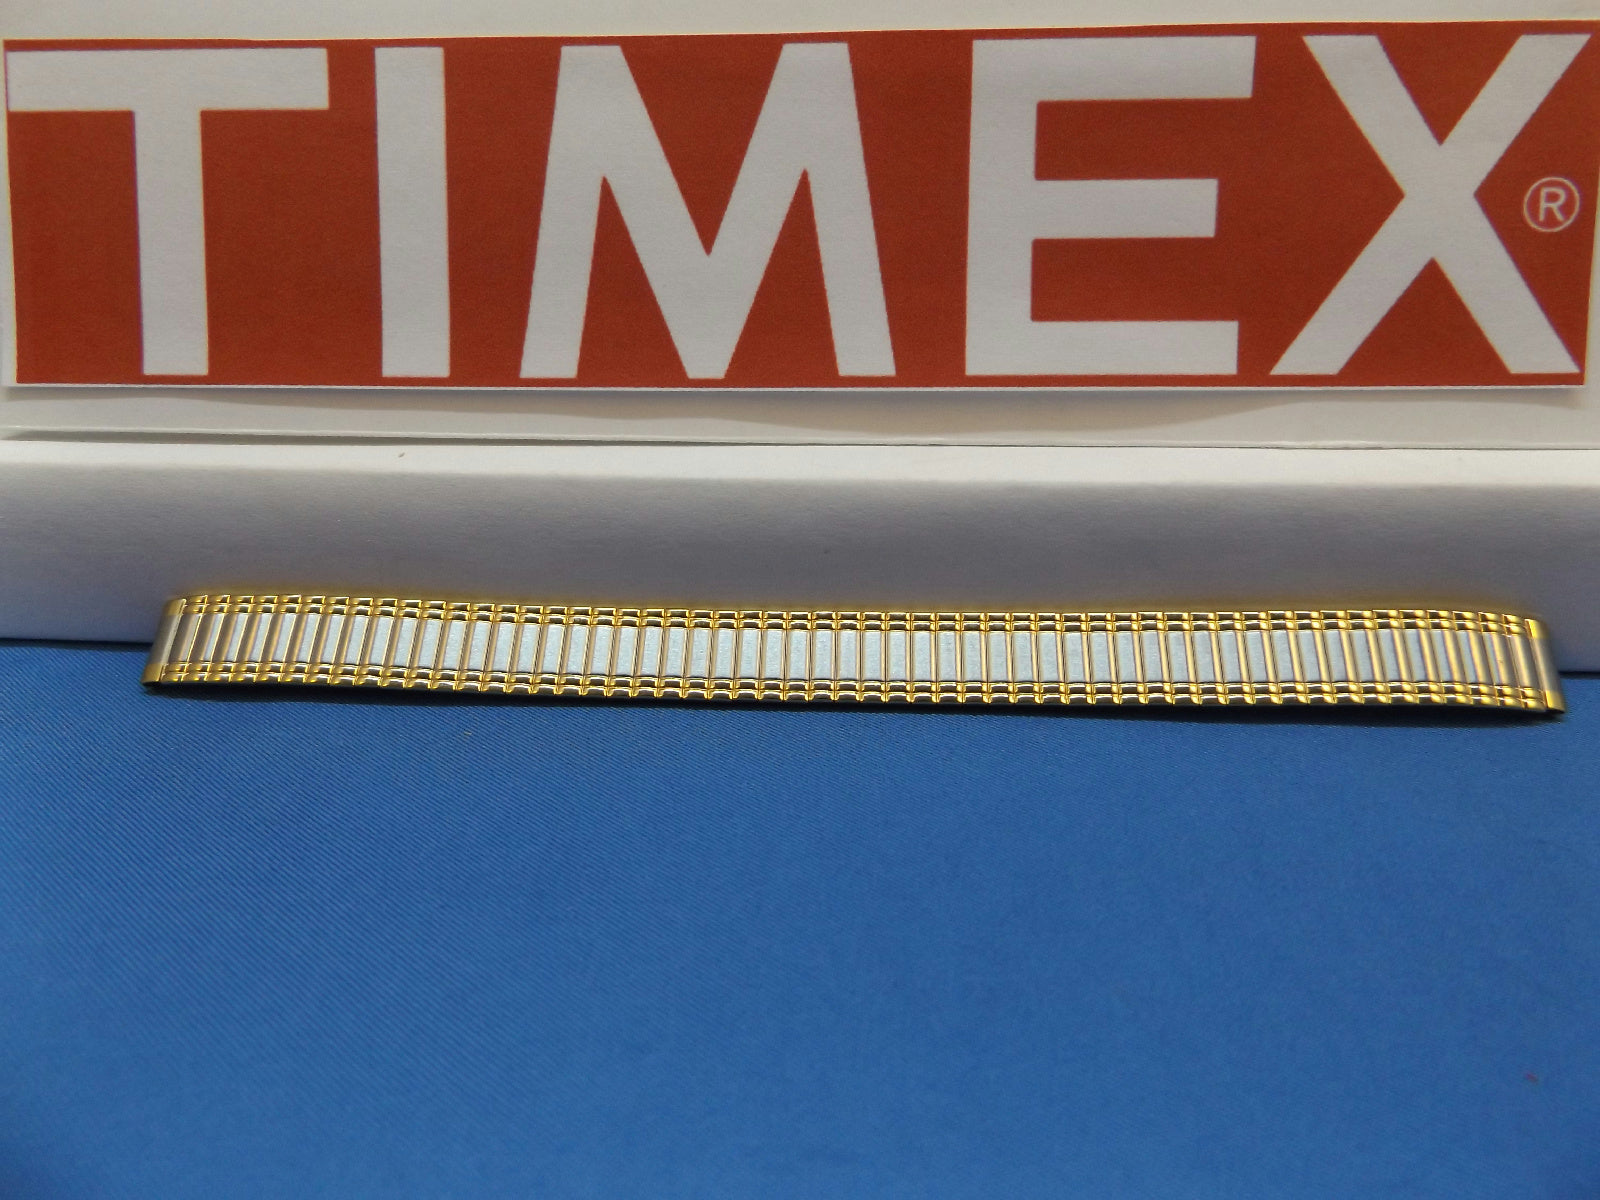 Timex watchband 10mm Two Tone Expansion/Stretch Bracelet Gld/Sil Lds Watchband